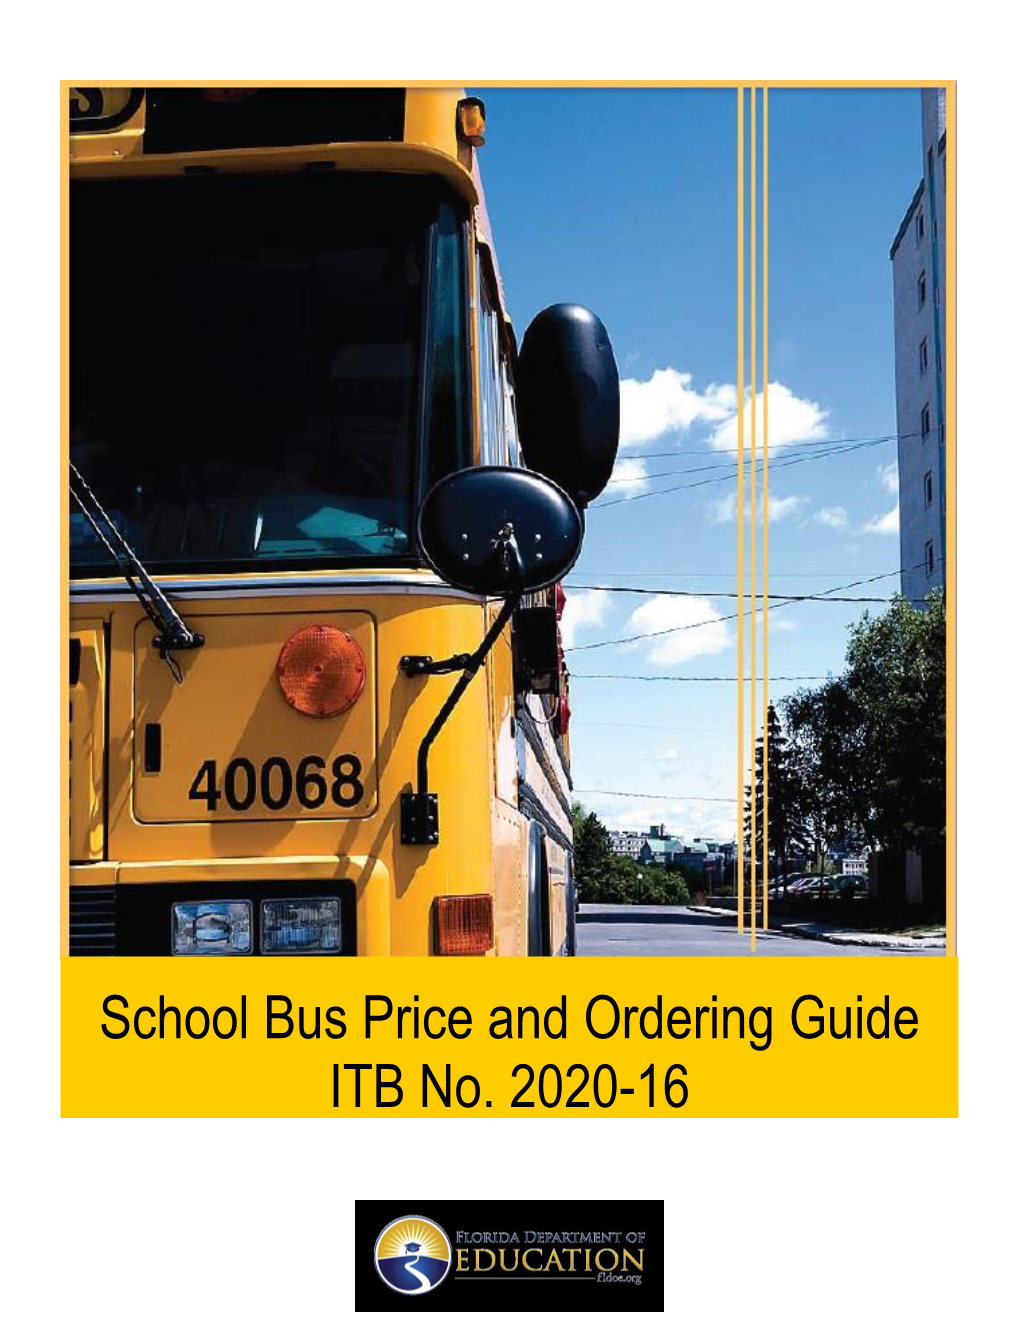 School Bus Price and Ordering Guide ITB No. 2020-16